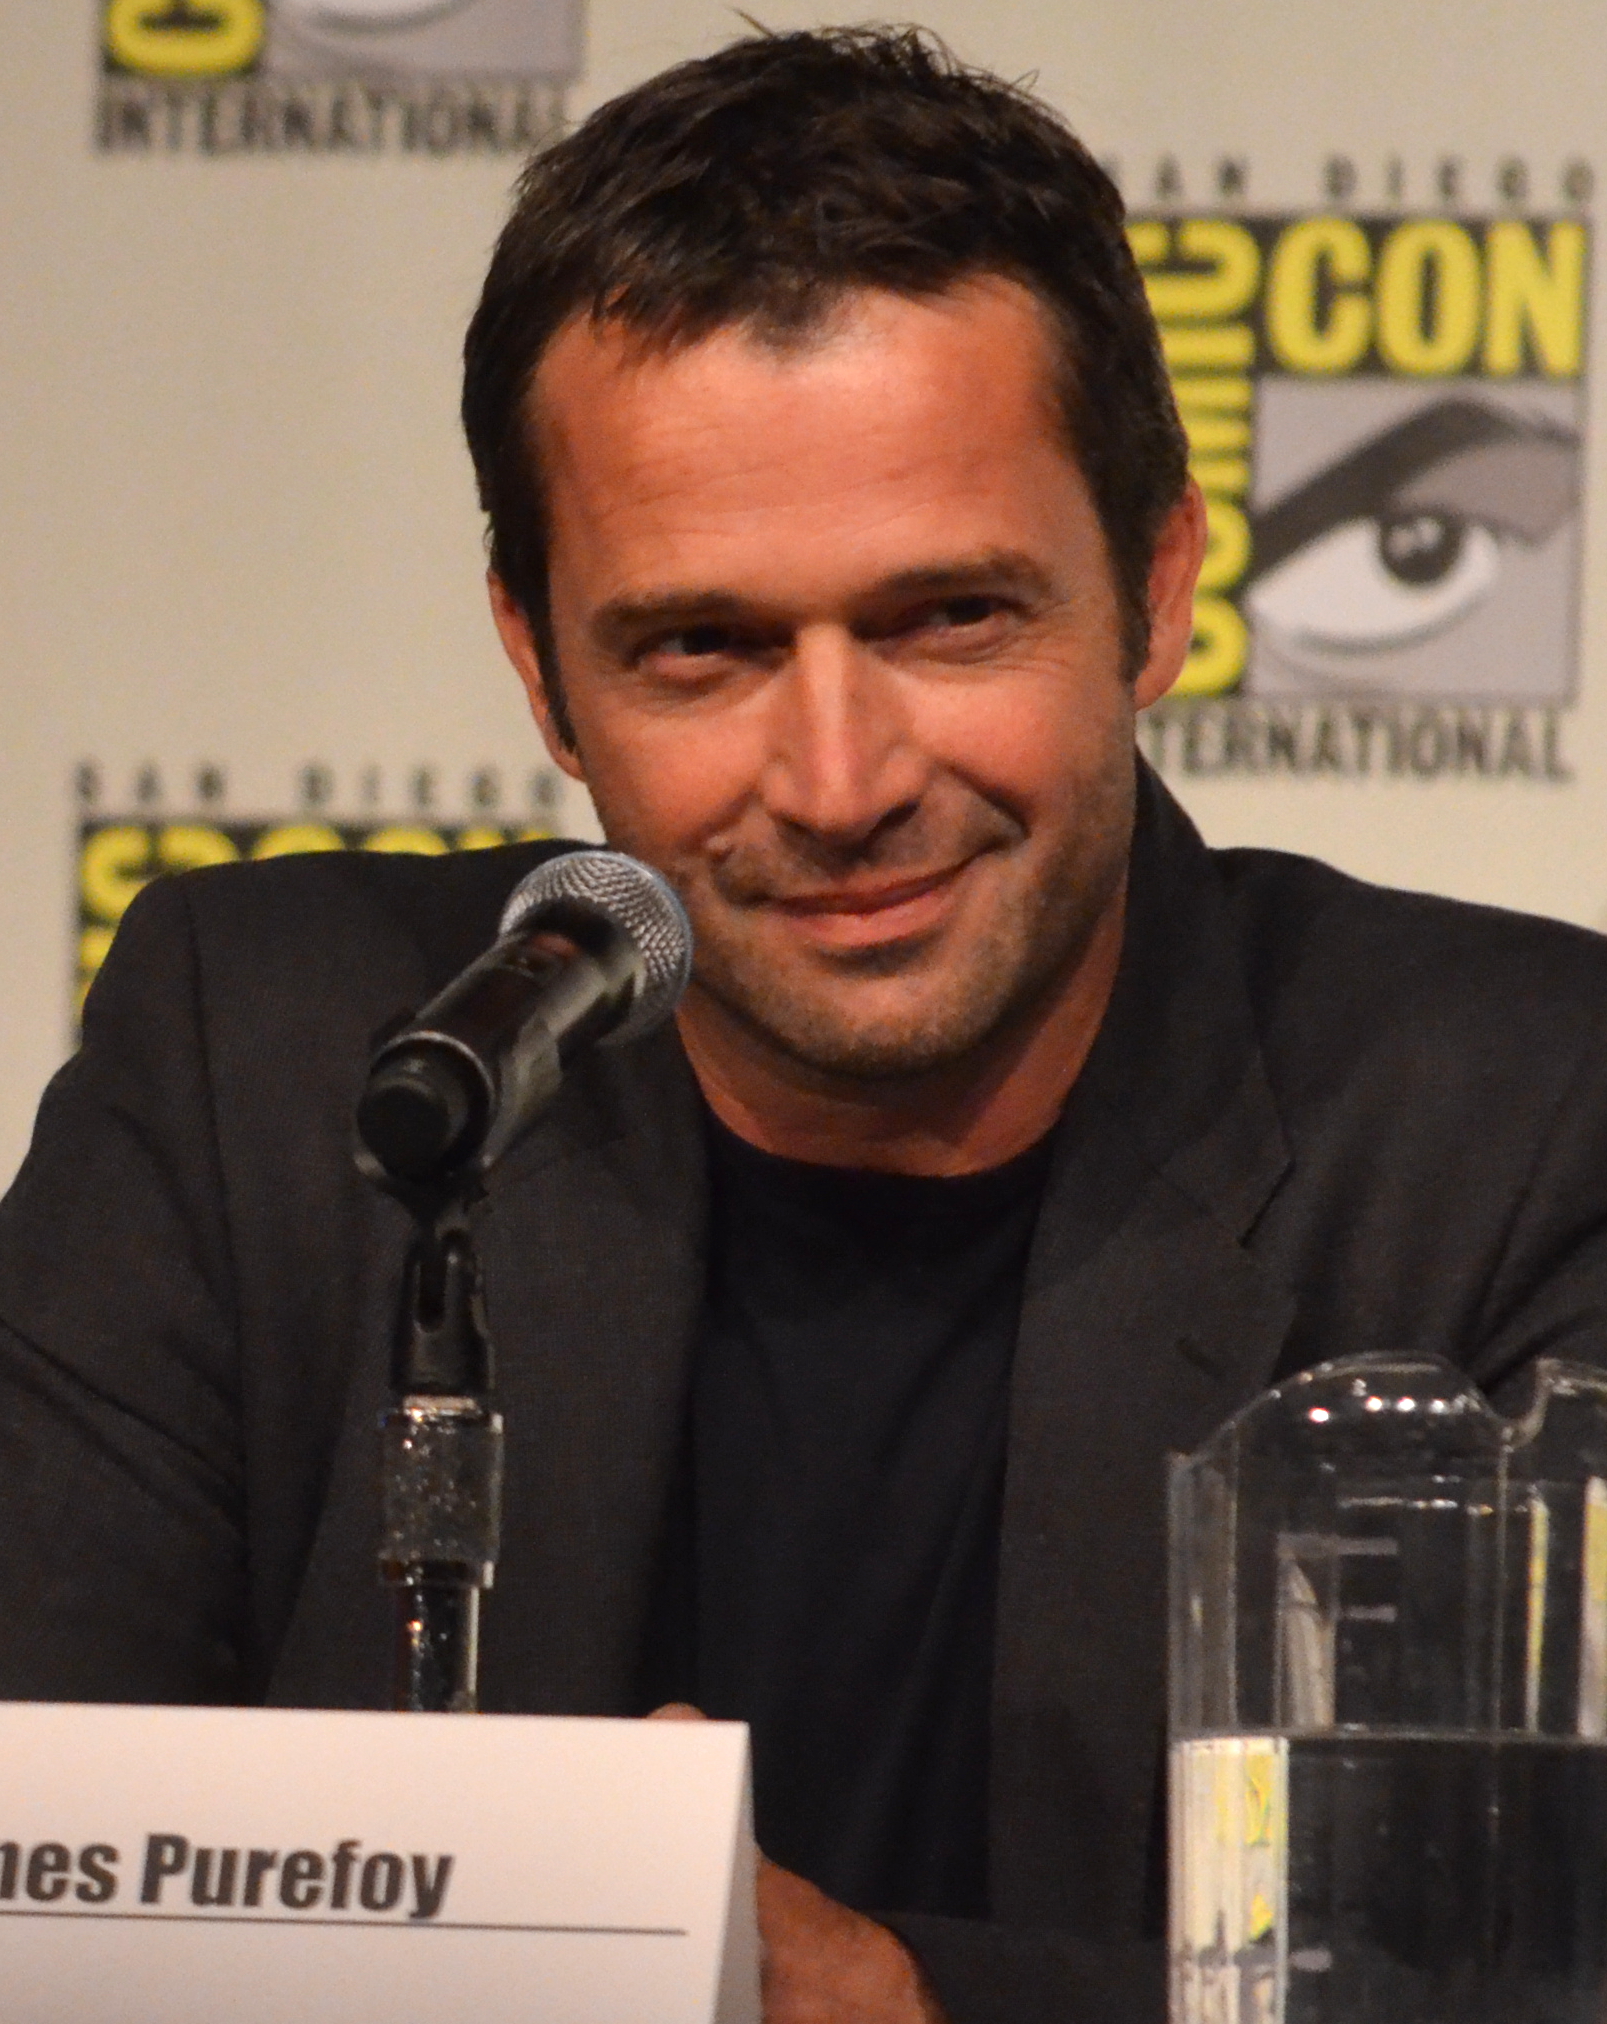 James_Purefoy_at_Comic-Con_2012_cropped.jpg